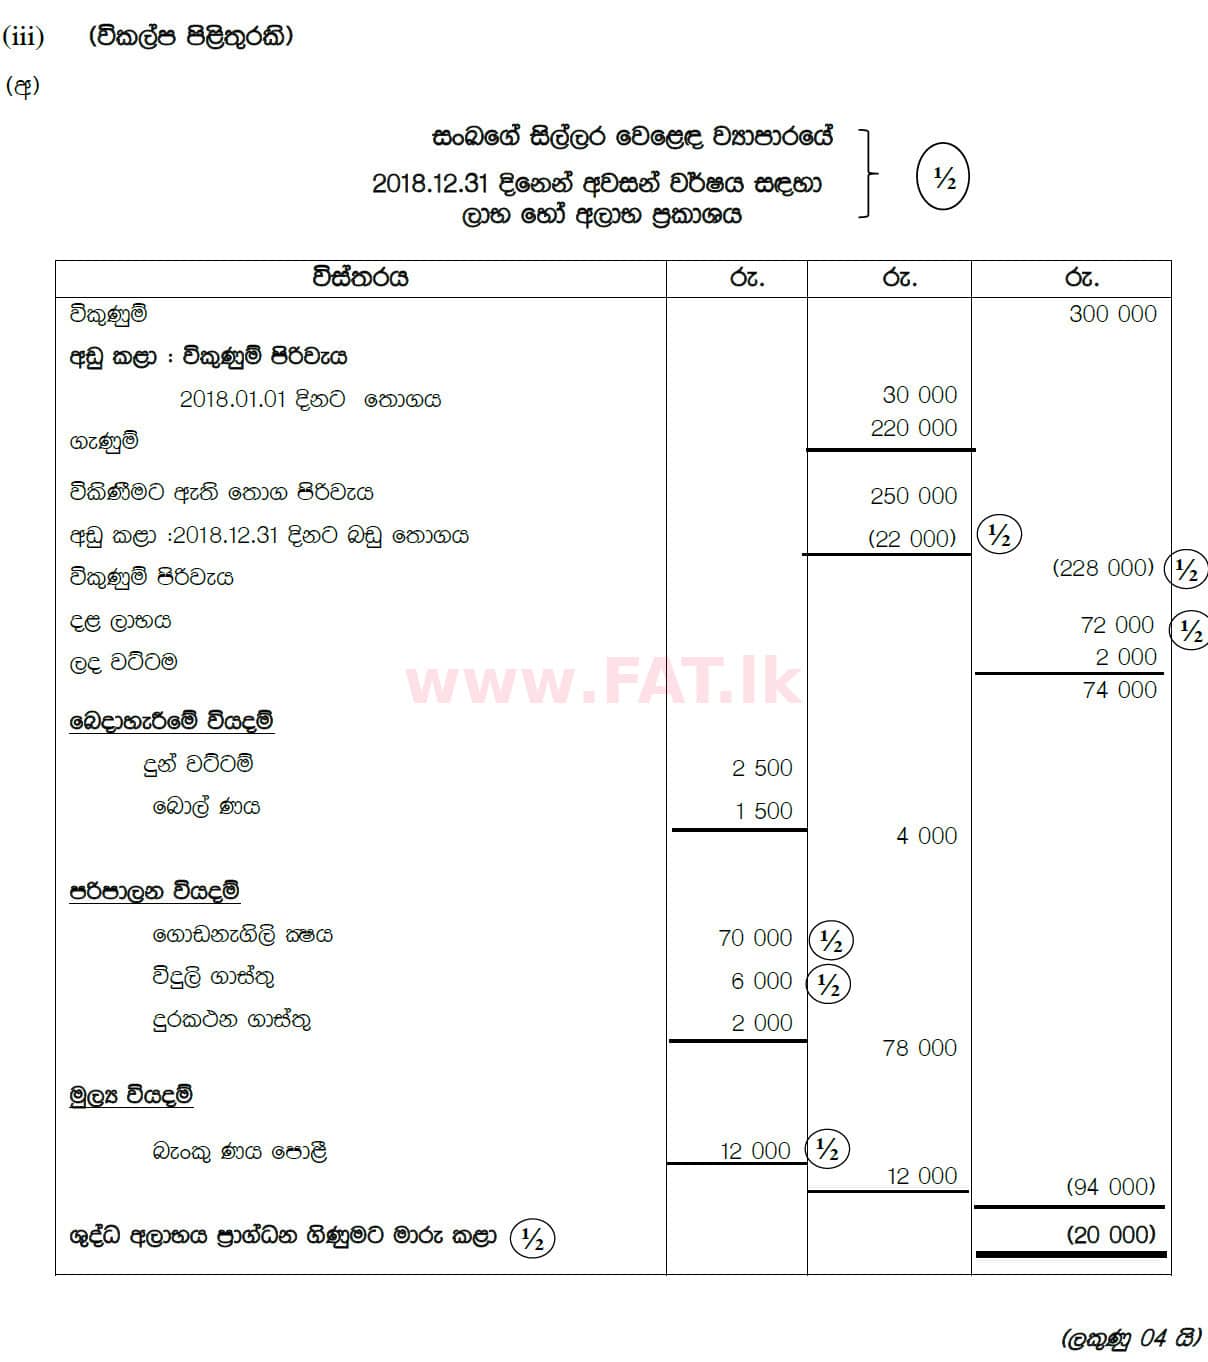 National Syllabus : Ordinary Level (O/L) Business and Accounting Studies - 2019 March - Paper II (සිංහල Medium) 7 5903